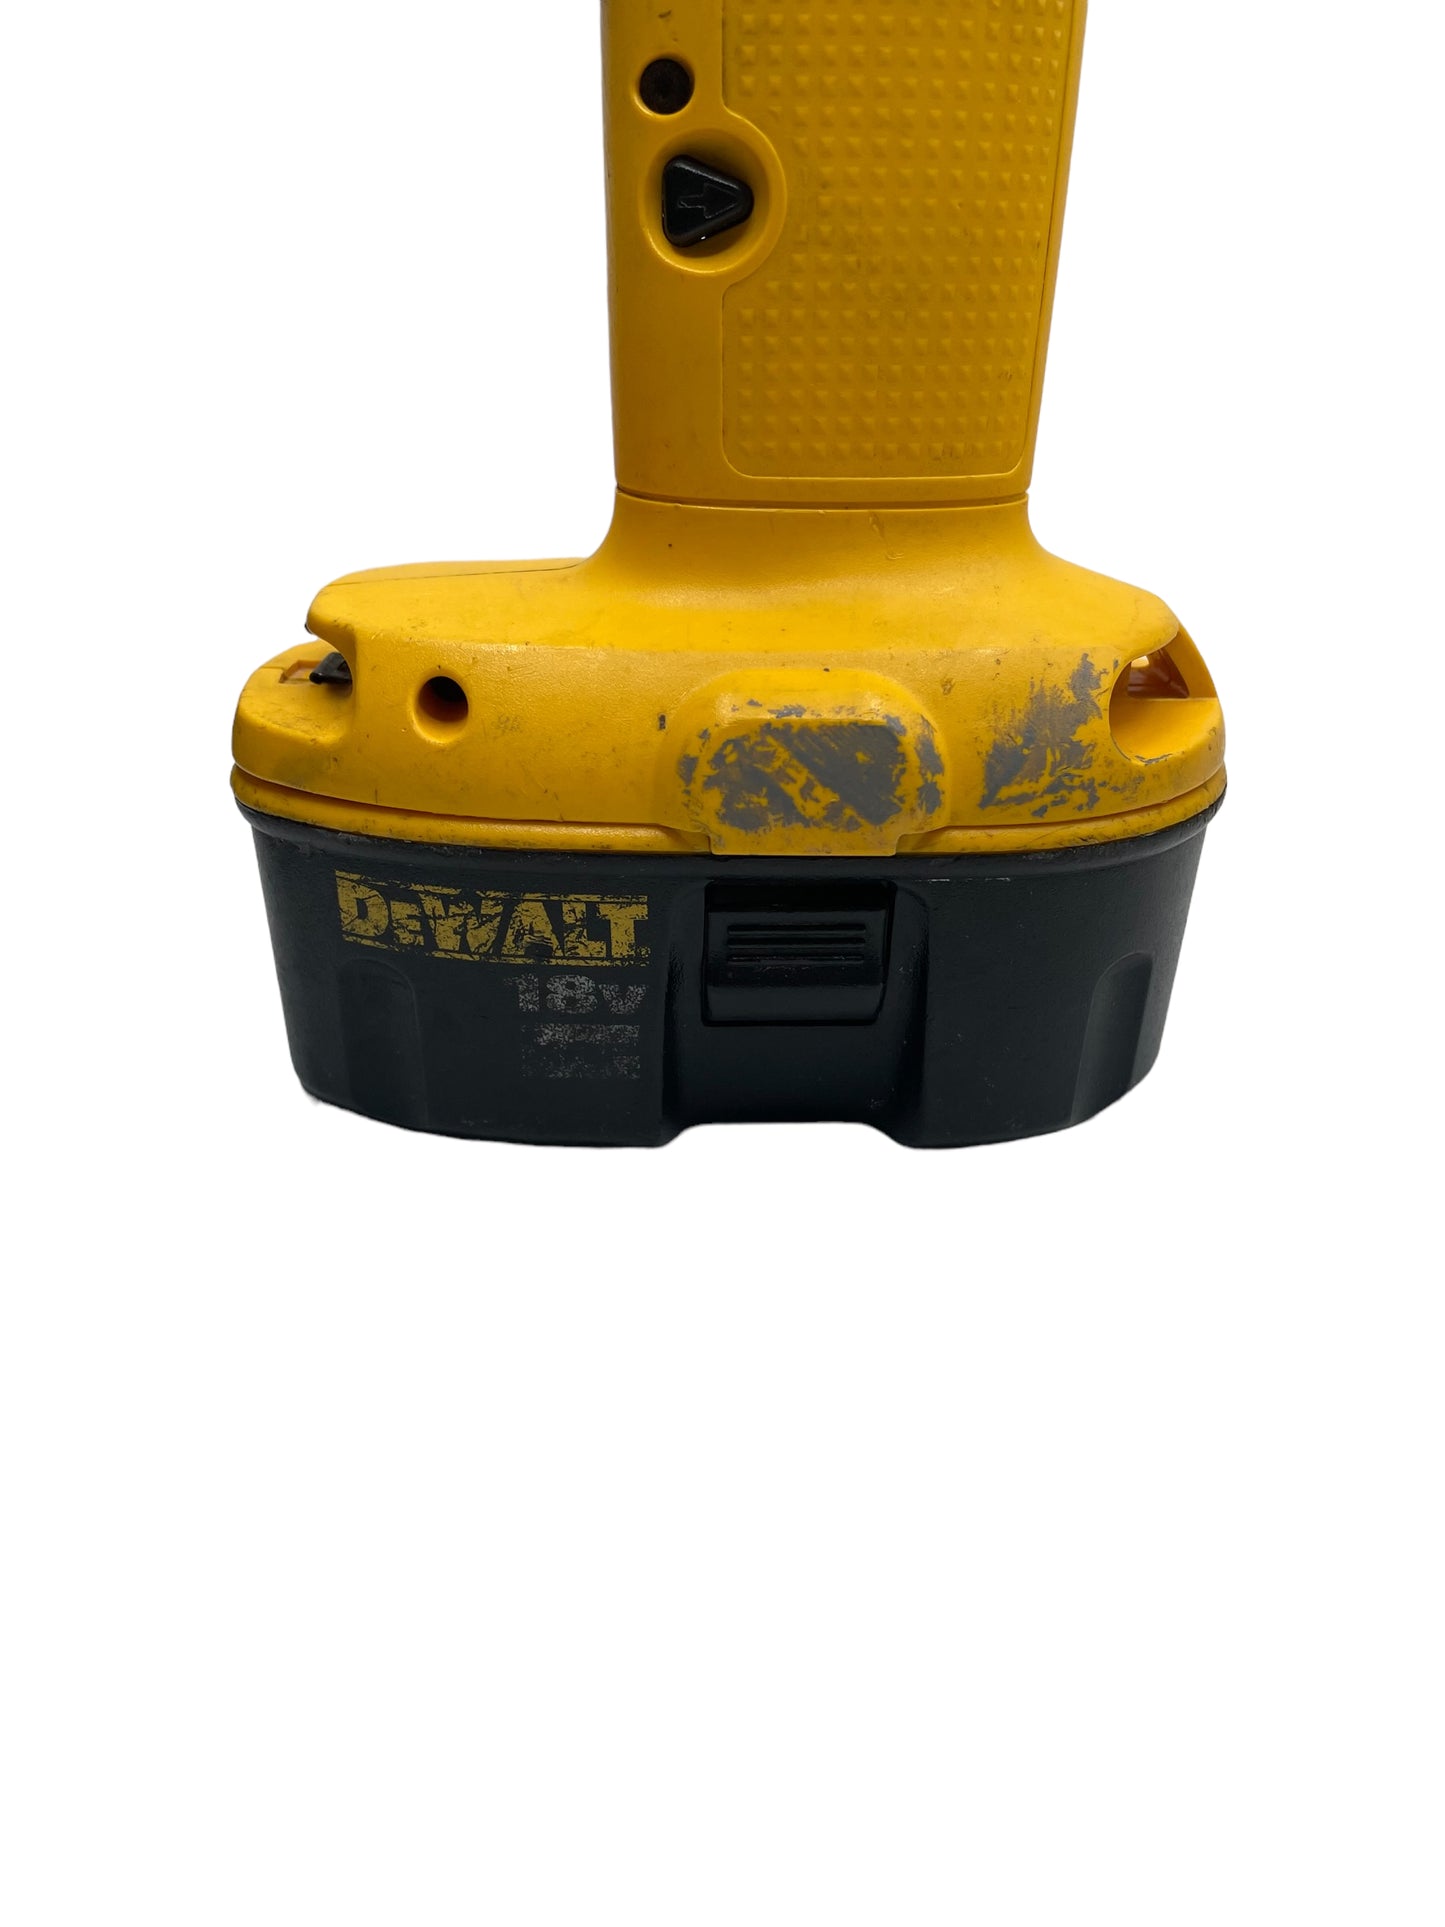 Dewalt DW960 Right Angle Drill Driver Cordless Power Tool